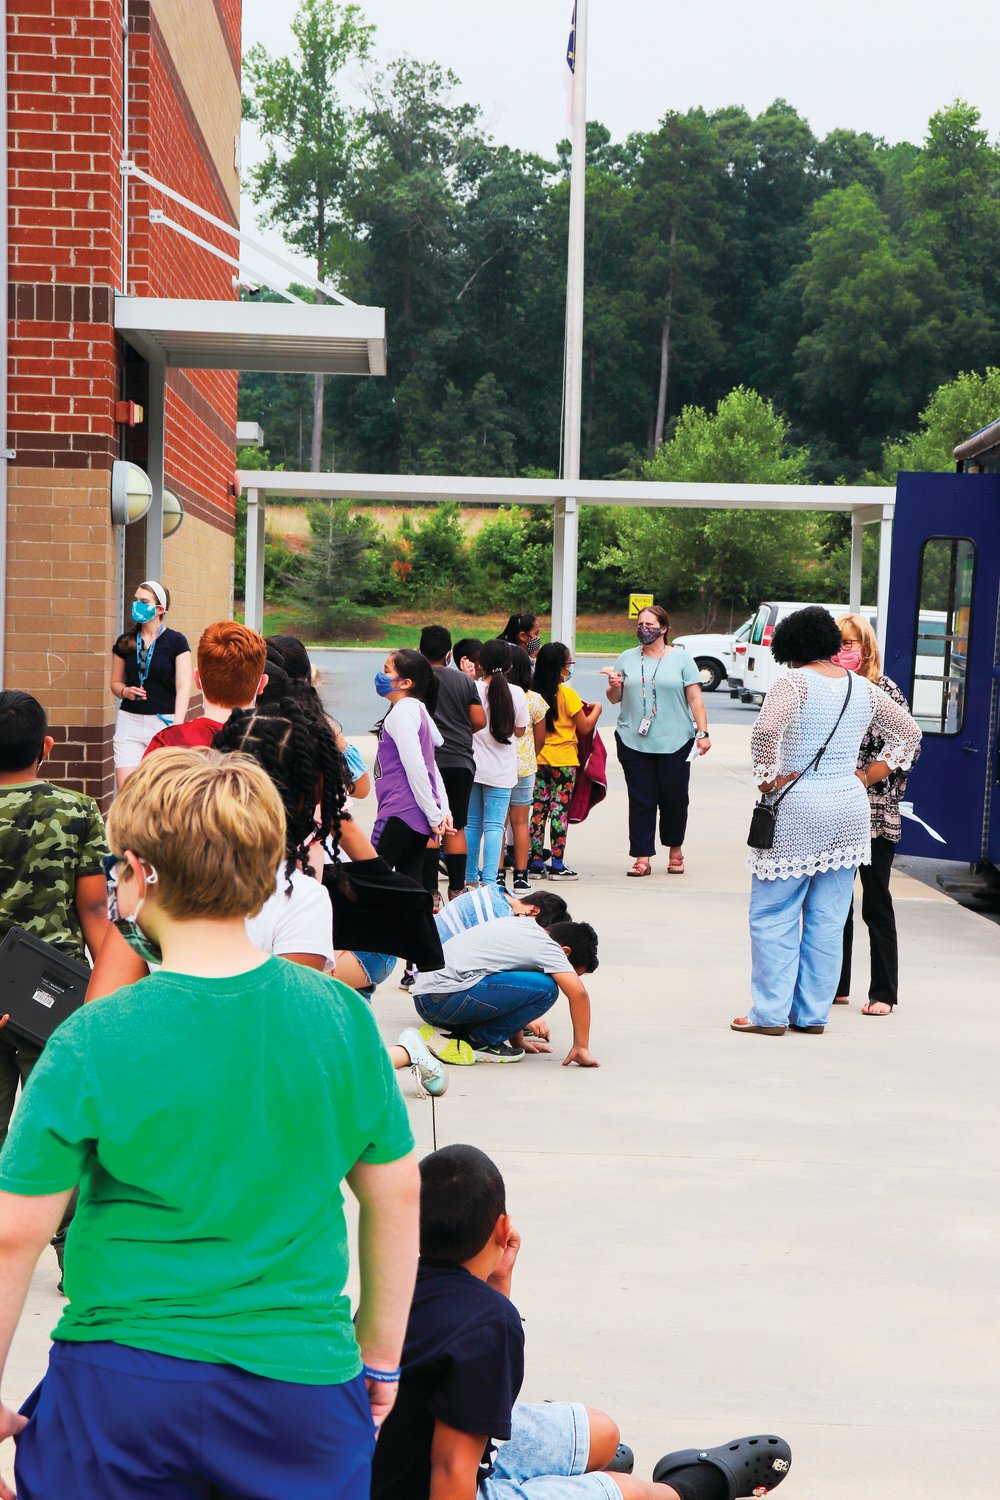 Children line up for the Bookmobile, waiting to go inside to grab some books last Tuesday at the Virginia Cross Elementary School in Siler City. Each child was able to take home some free books to read over the summer.